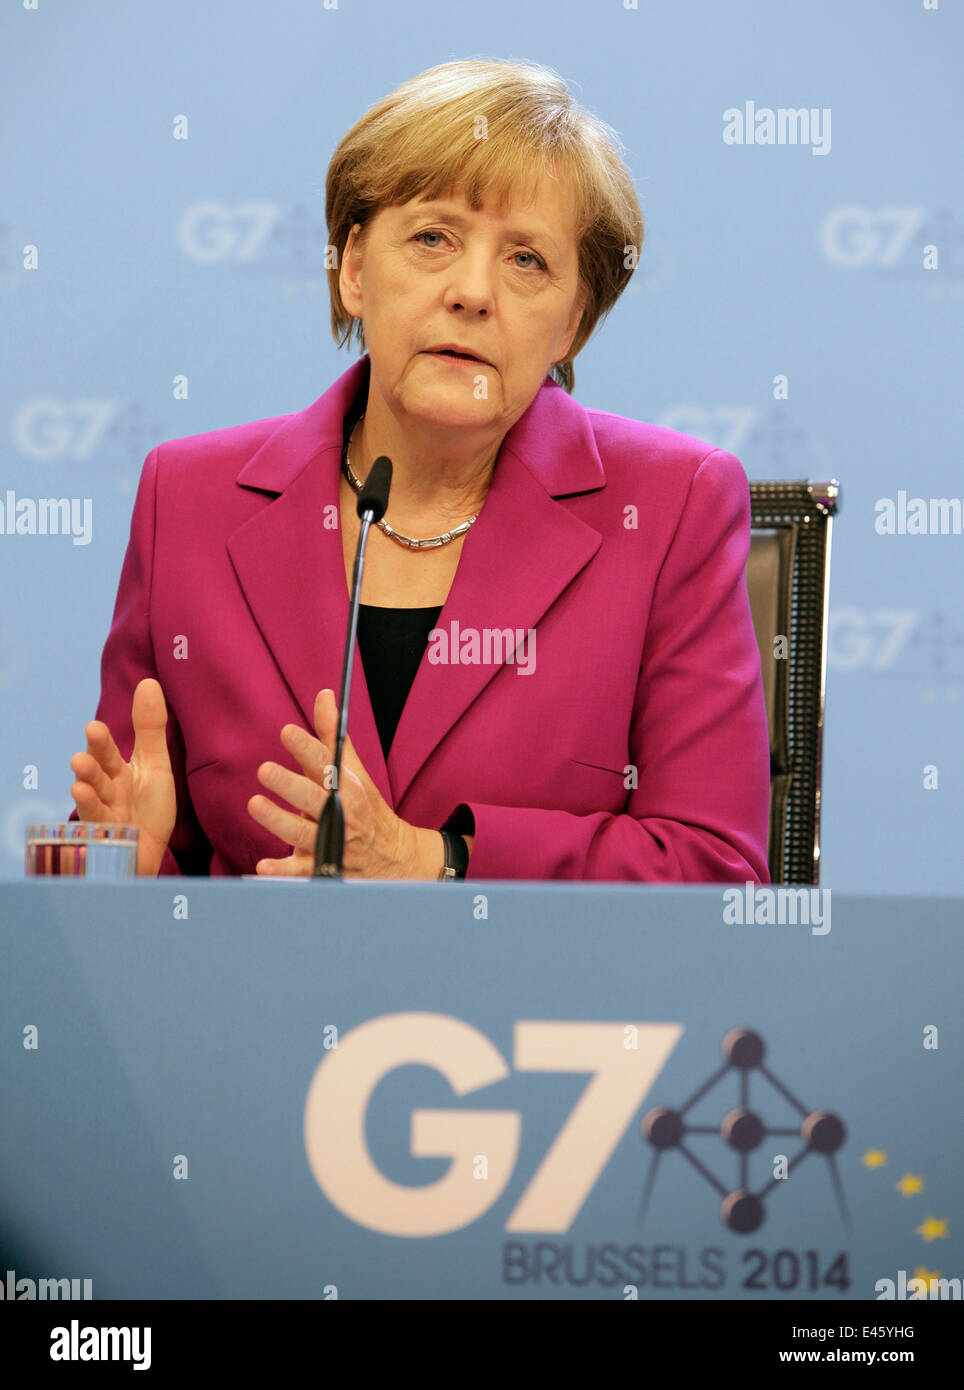 german Chancellor, Angela Merkel giving press conference at G7 SUMMIT, Brussels 2014 Stock Photo